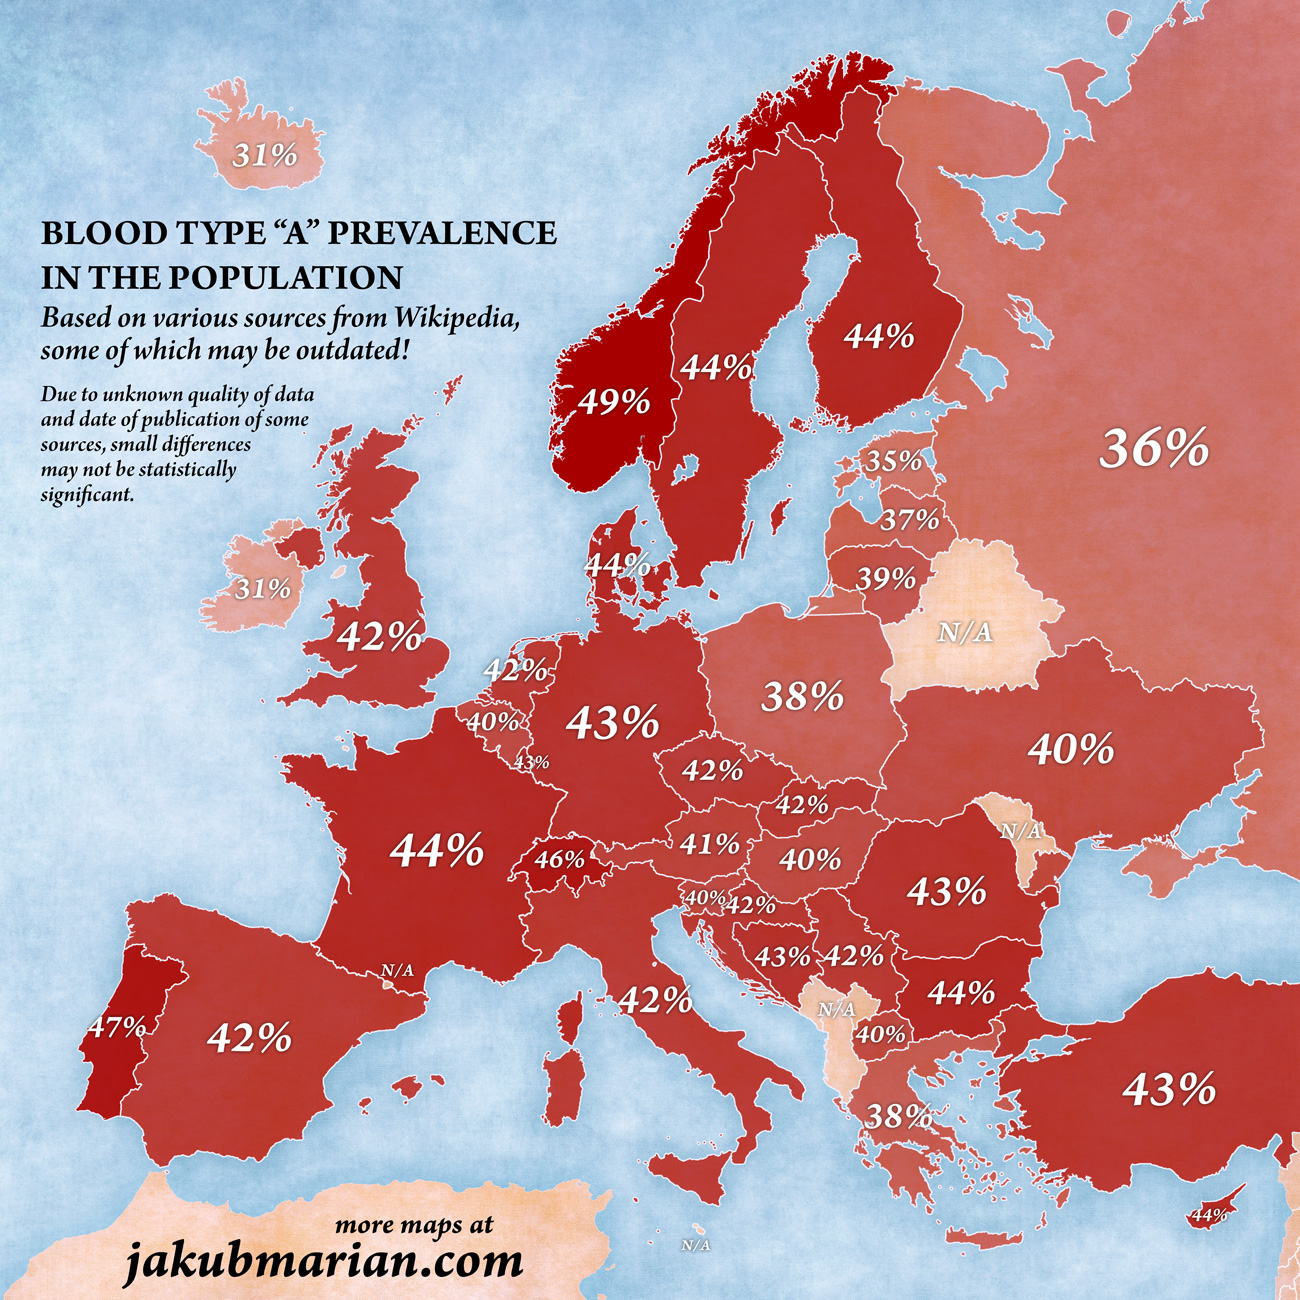 Blood type A in Europe